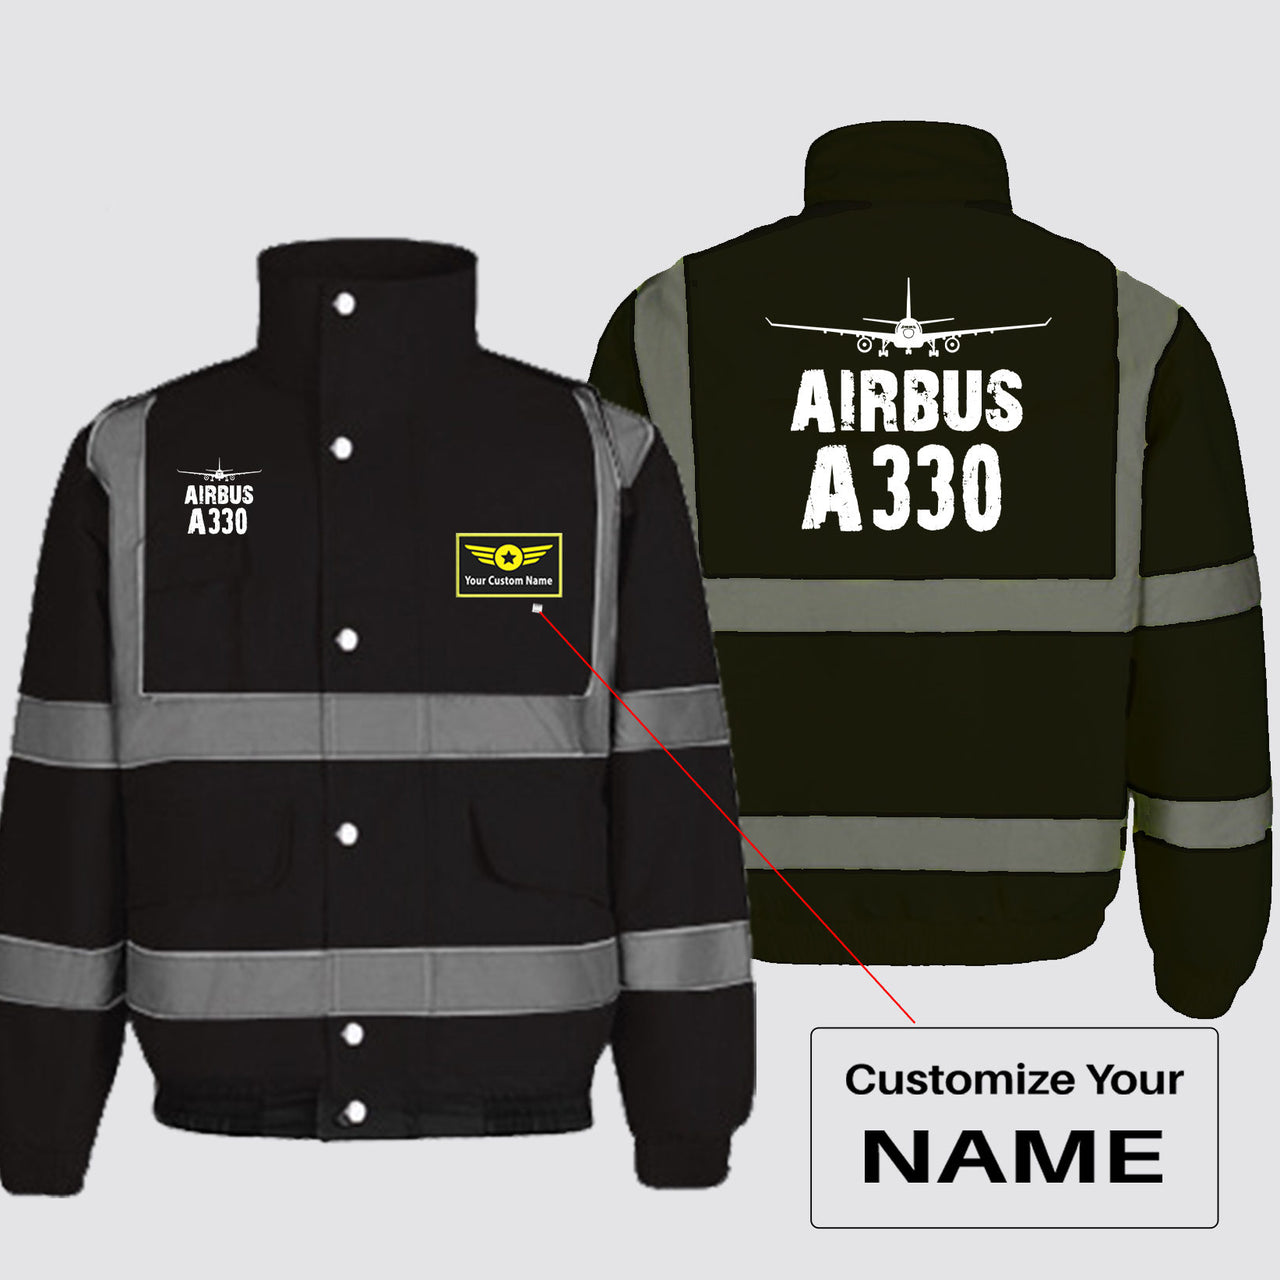 Airbus A330 & Plane Designed Reflective Winter Jackets